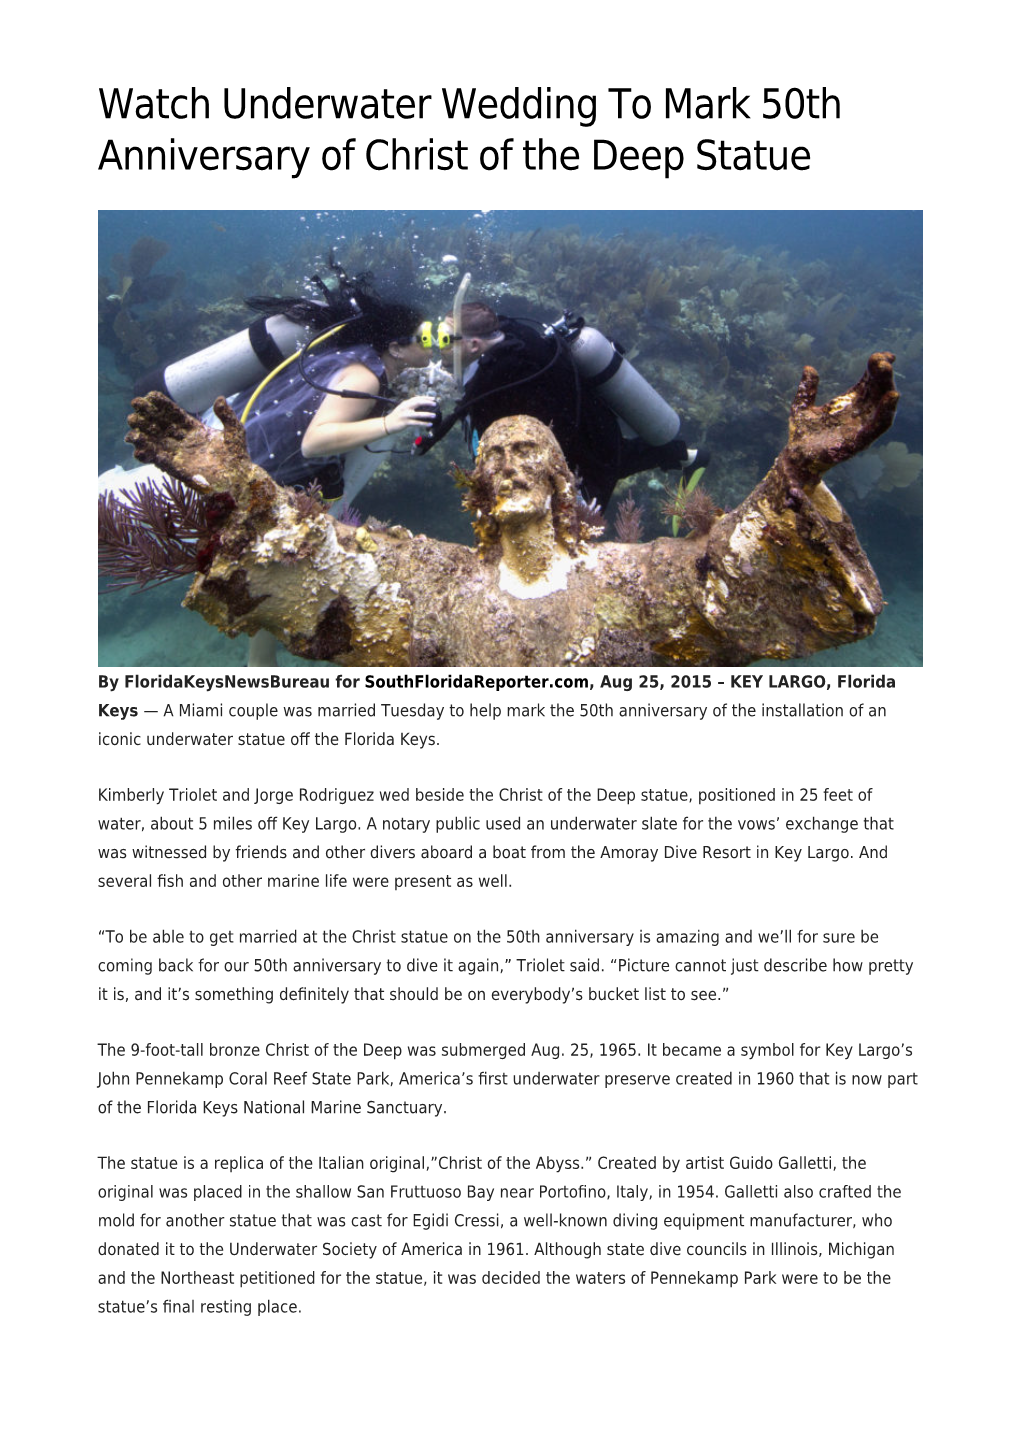 Watch Underwater Wedding to Mark 50Th Anniversary of Christ of the Deep Statue